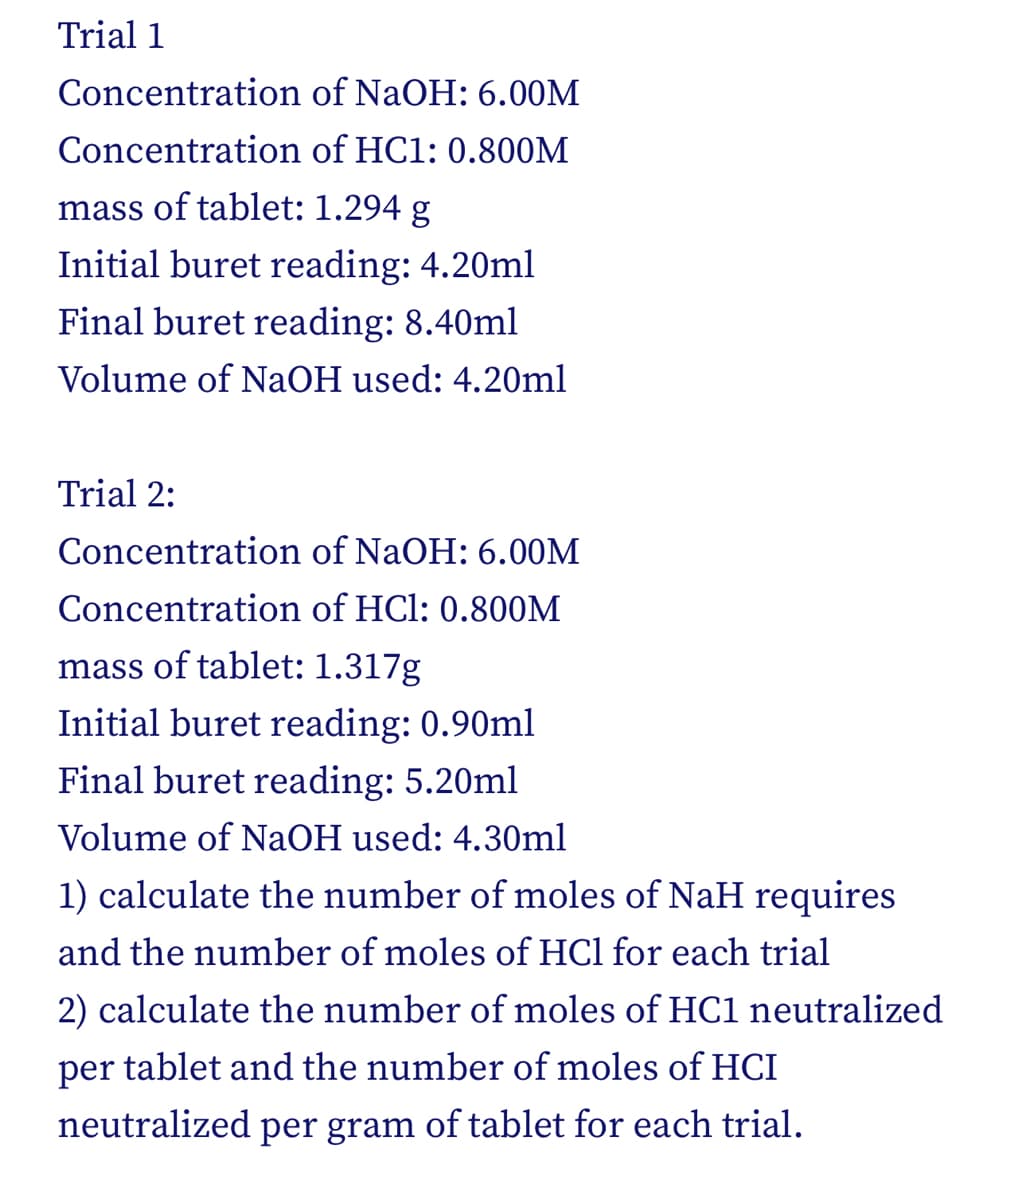 Trial 1
Concentration of NaOH: 6.00M
Concentration of HC1: 0.800M
mass of tablet: 1.294 g
Initial buret reading: 4.20ml
Final buret reading: 8.40ml
Volume of NaOH used: 4.20ml
Trial 2:
Concentration of NaOH: 6.00M
Concentration of HCl: 0.800M
mass of tablet: 1.317g
Initial buret reading: 0.90ml
Final buret reading: 5.20ml
Volume of NaOH used: 4.30ml
1) calculate the number of moles of NaH requires
and the number of moles of HCl for each trial
2) calculate the number of moles of HC1 neutralized
per tablet and the number of moles of HCI
neutralized per gram of tablet for each trial.
